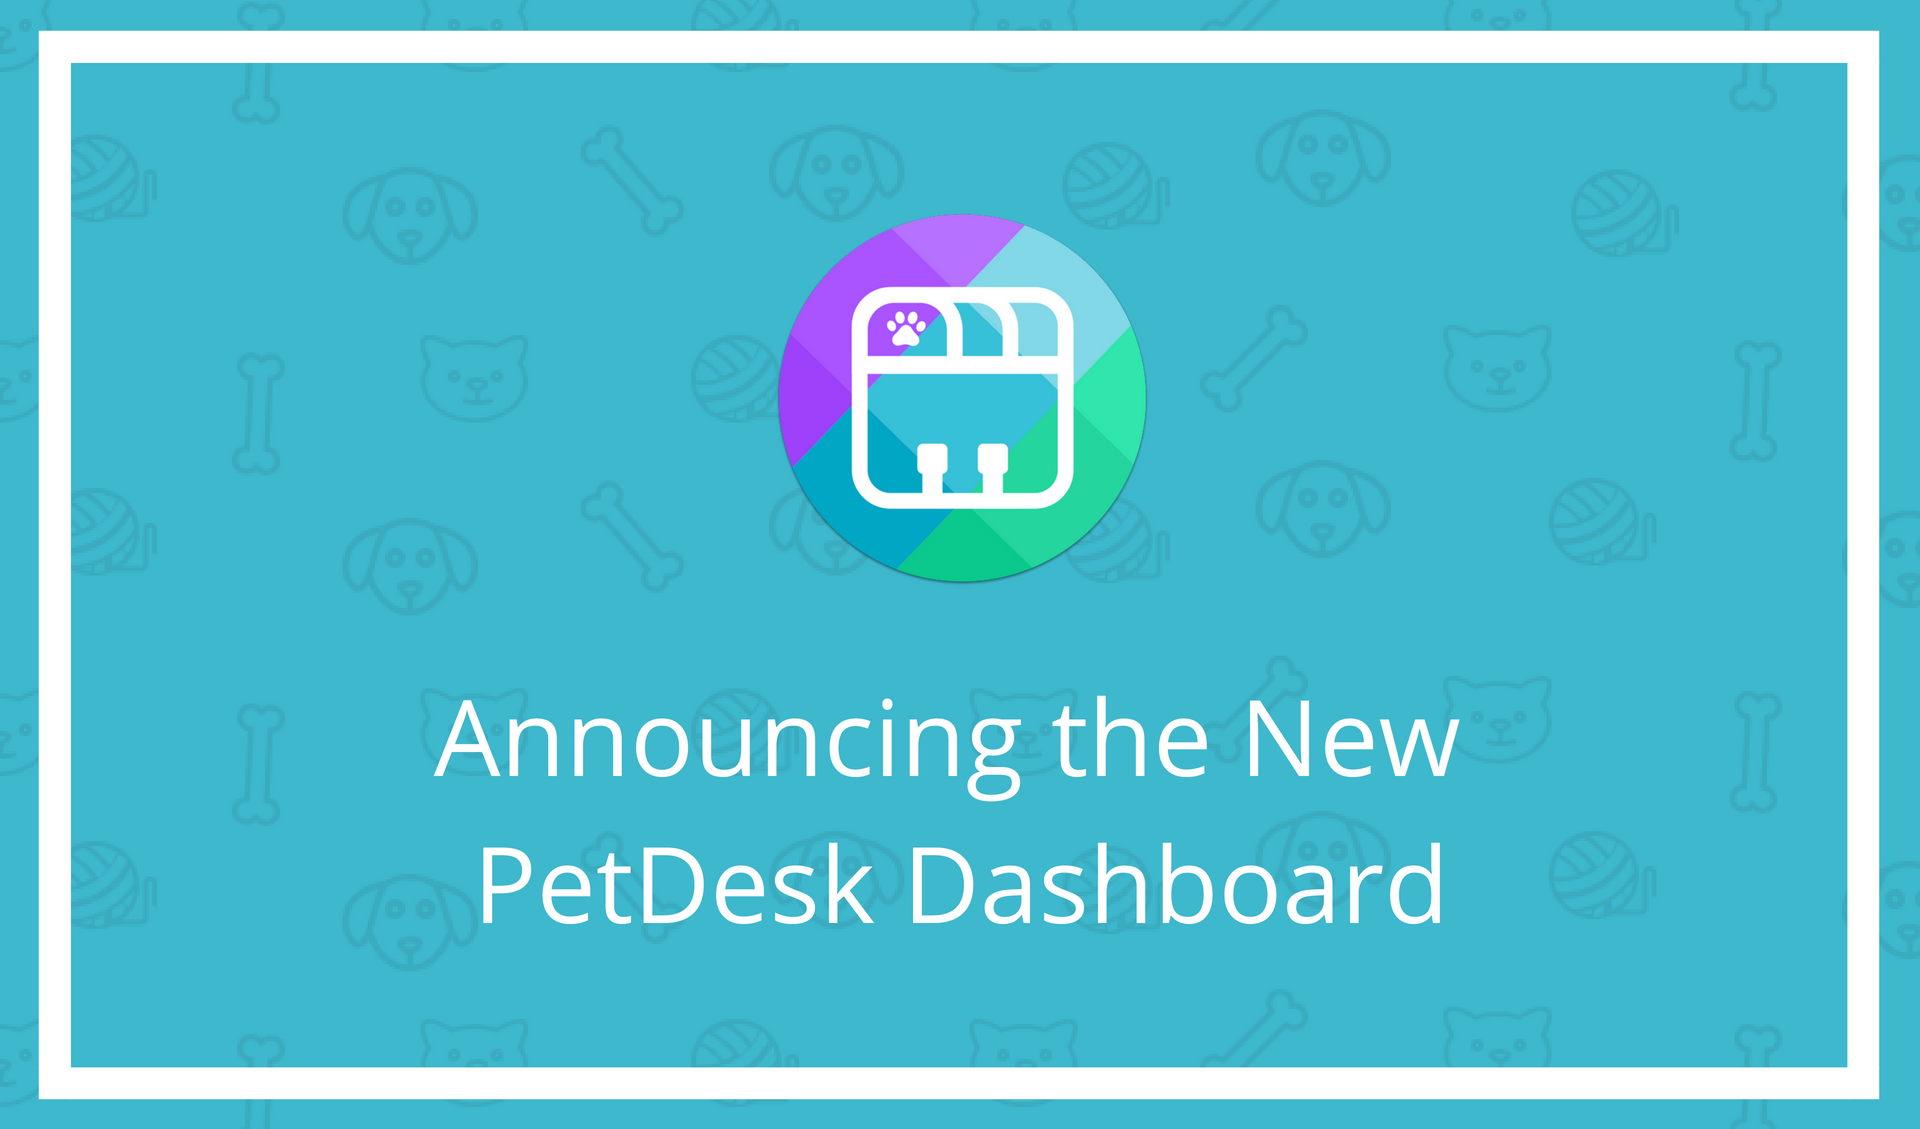 Announcing the New PetDesk Dashboard